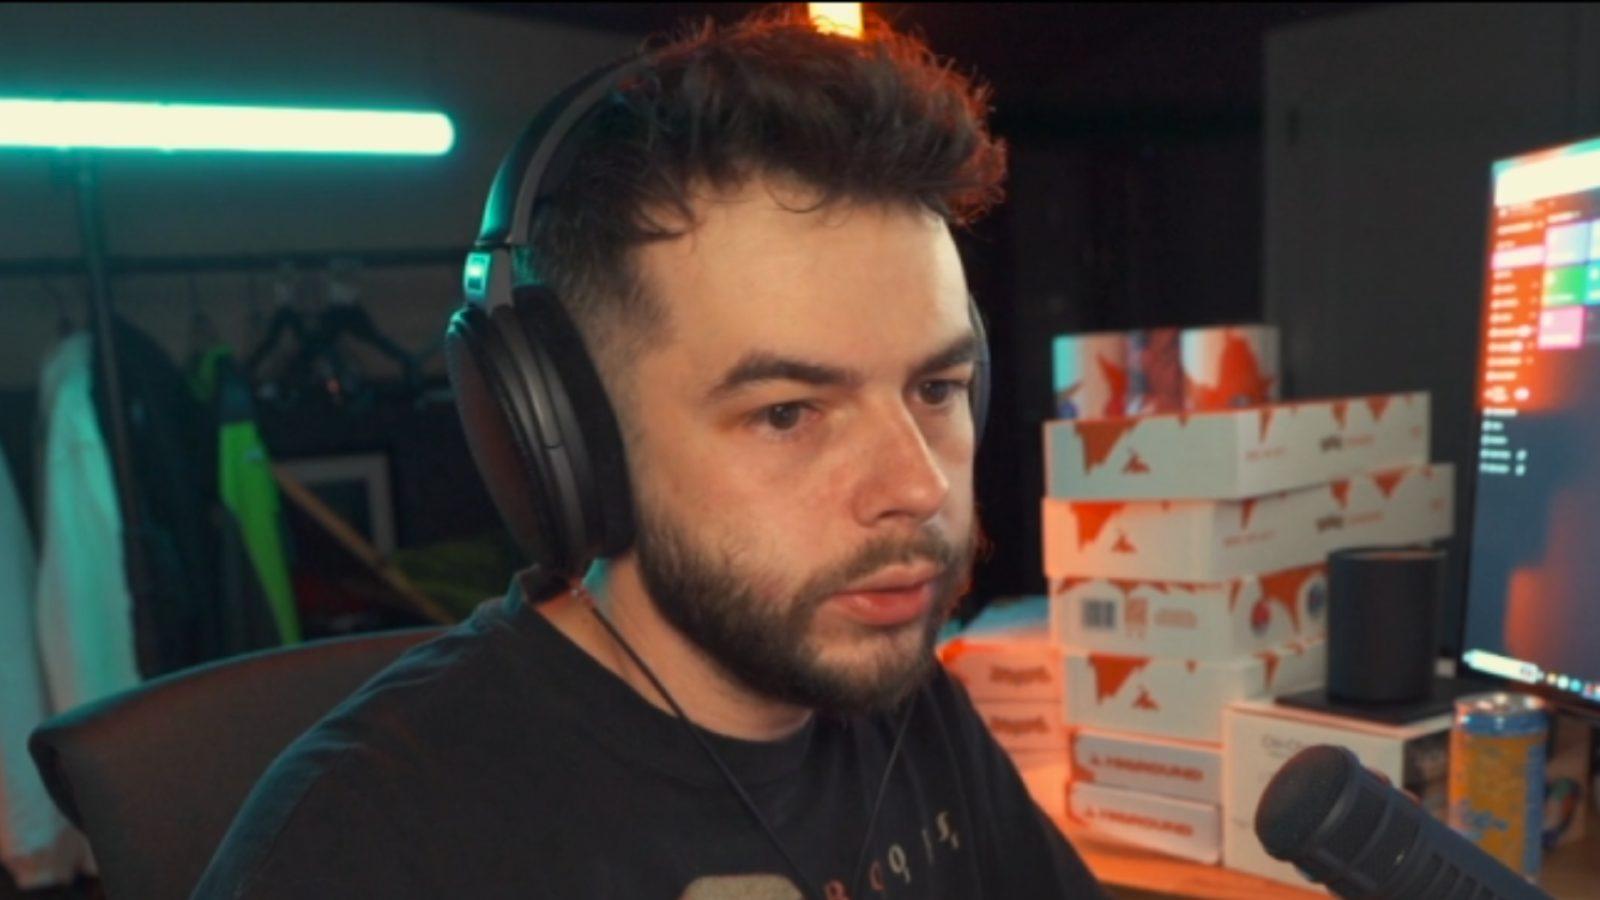 Nadeshot streaming on Twitch